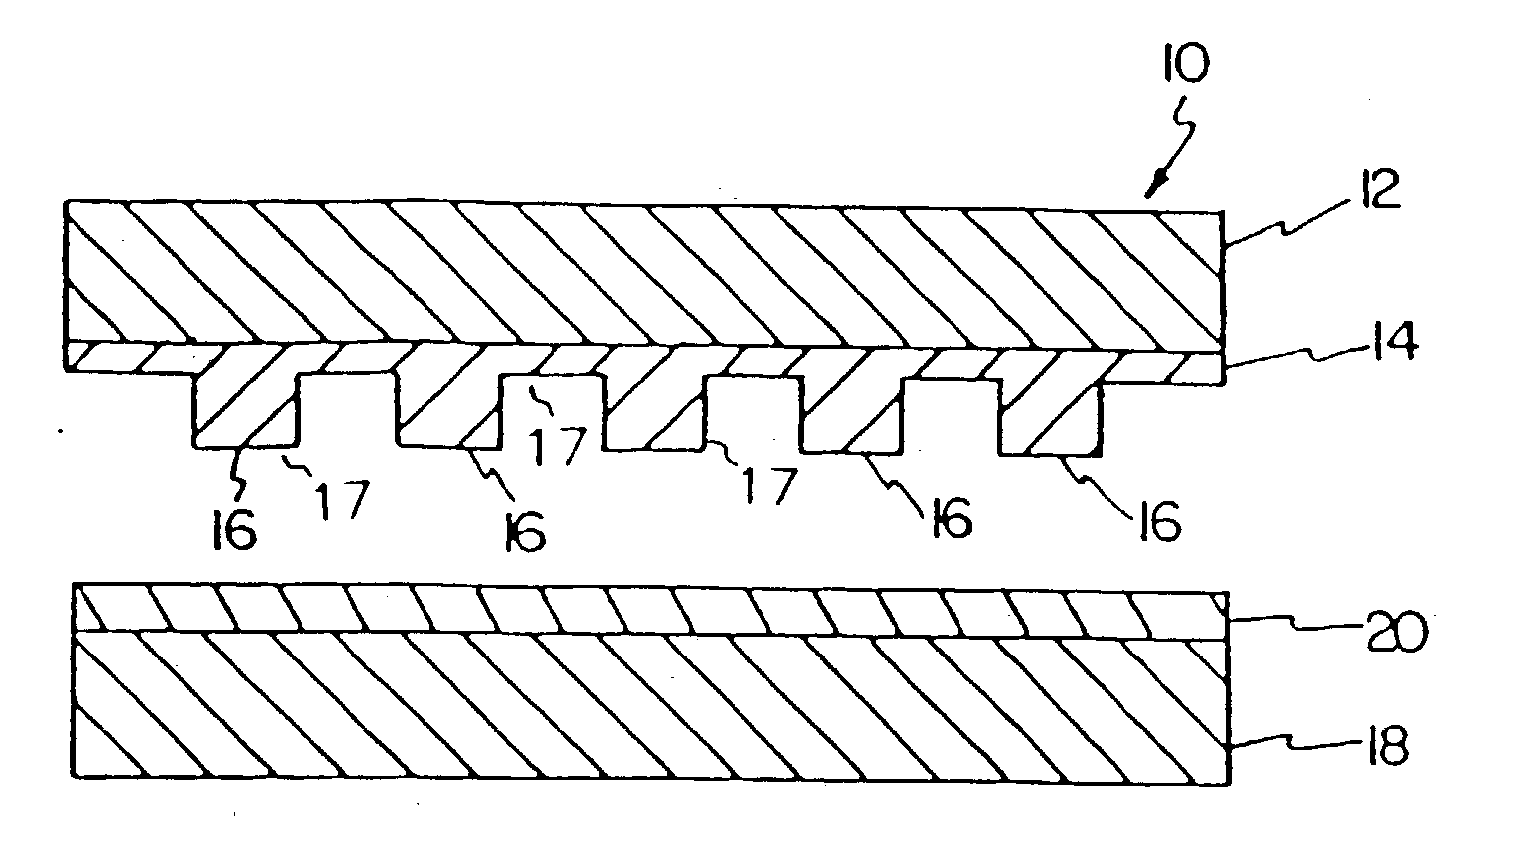 Lithographic apparatus for molding ultrafine features